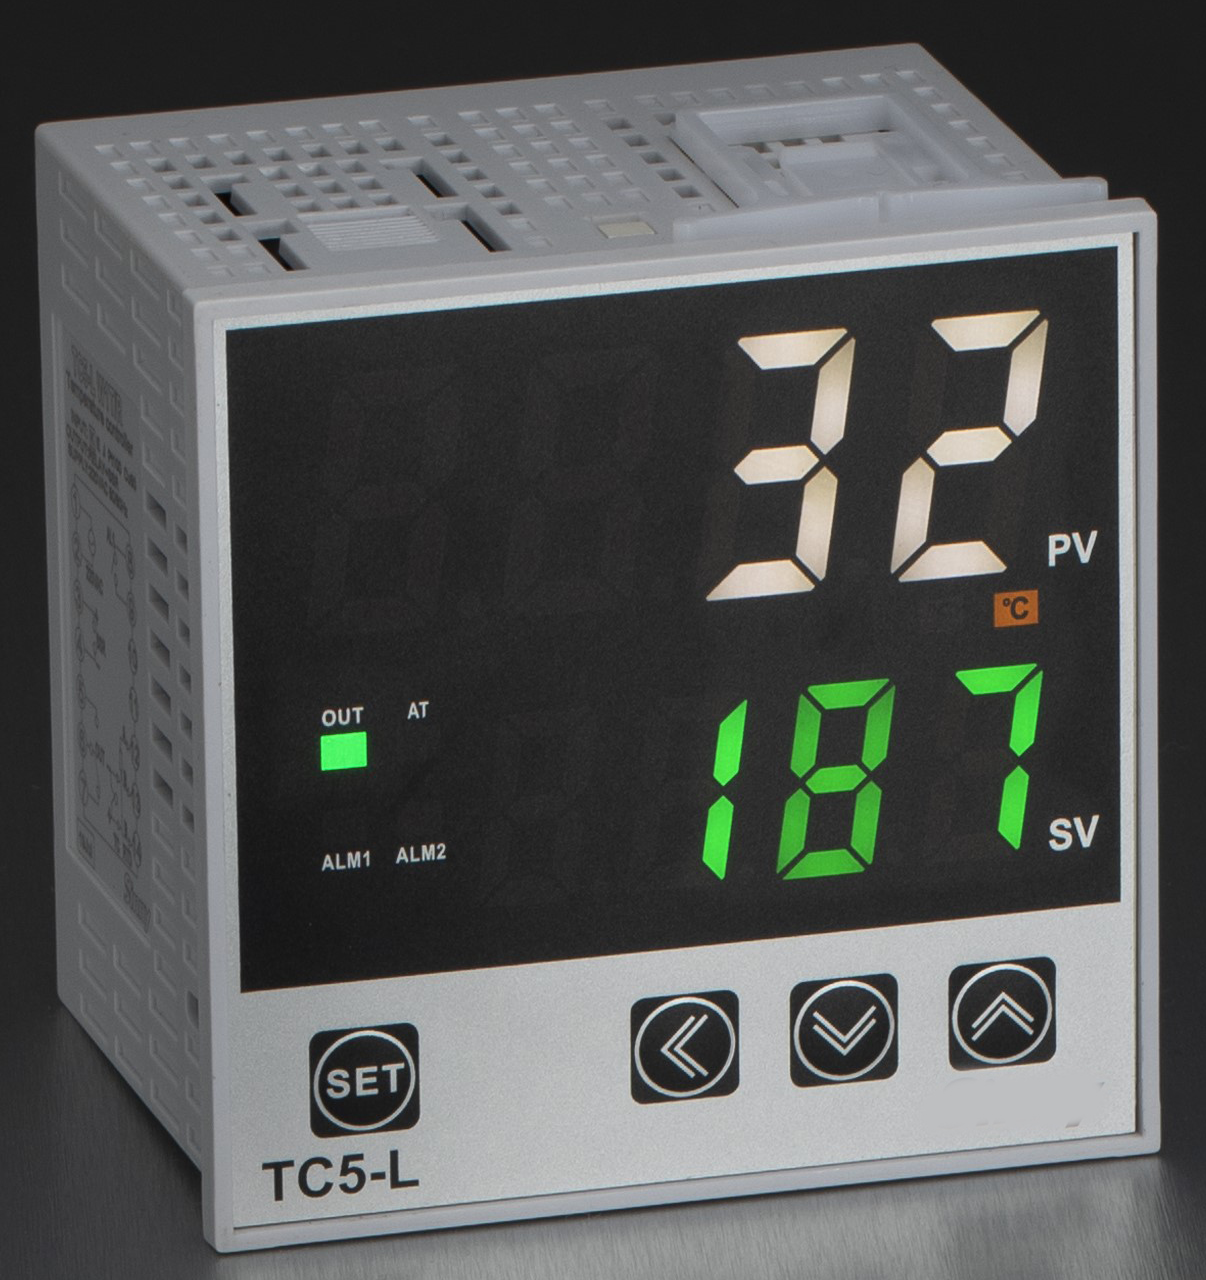 FC5-L-1A-1-G-2-C PID Controller, 100-240VAC with 1 Alarm, RS485, E,J,N,T,S,R,B Thermocouple, Linear Current/Voltage and  PT100/Cu20 RTD Input, 96x96mm,4-20mA Output